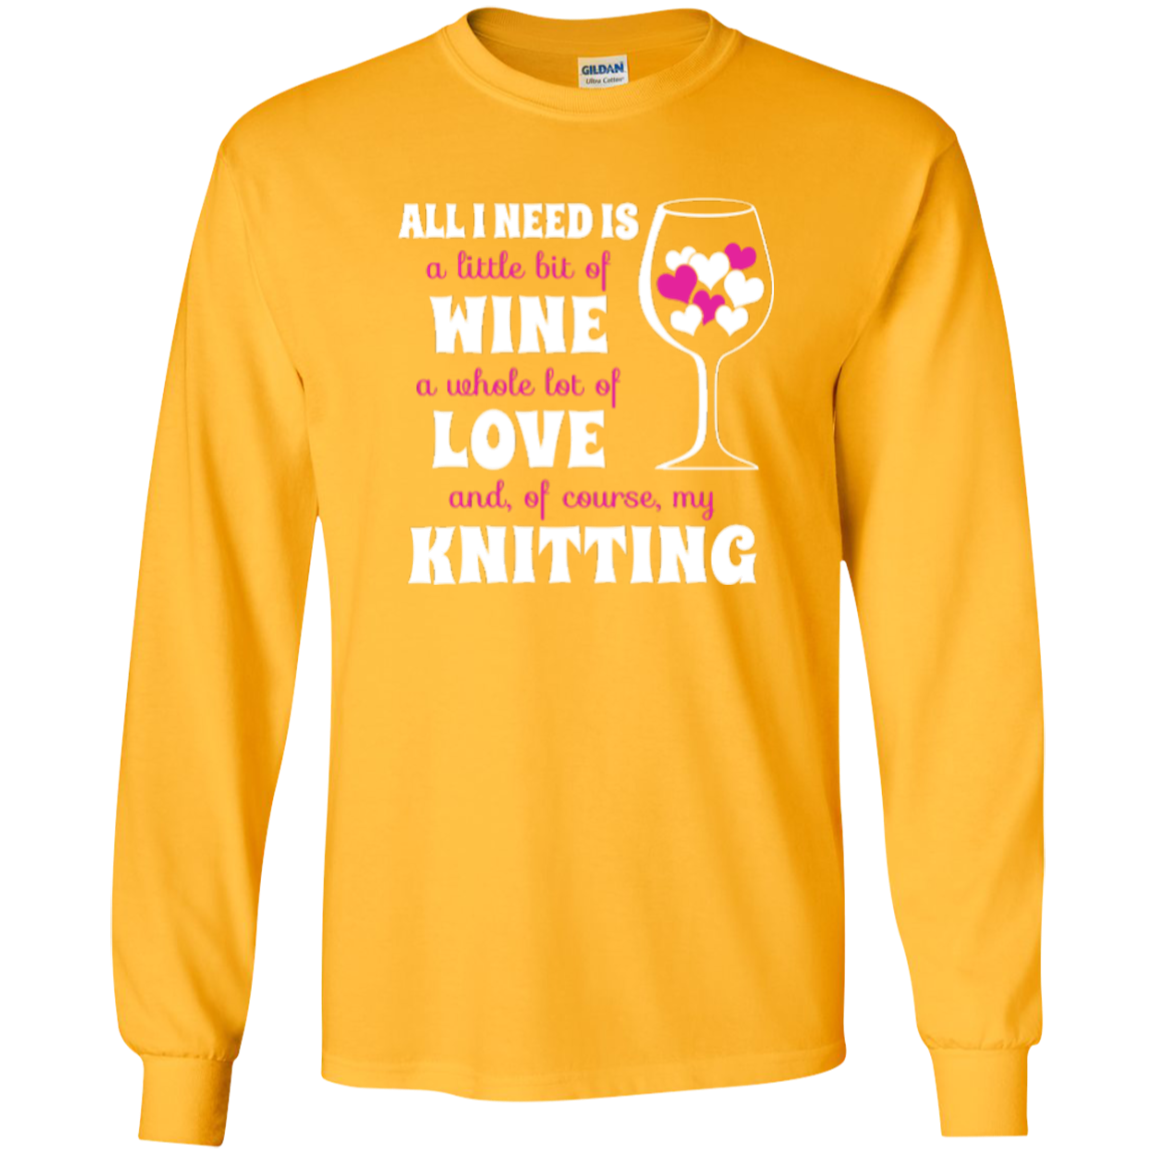 All I Need is Wine-Love-Knitting Long Sleeve Ultra Cotton Tshirt - Crafter4Life - 5